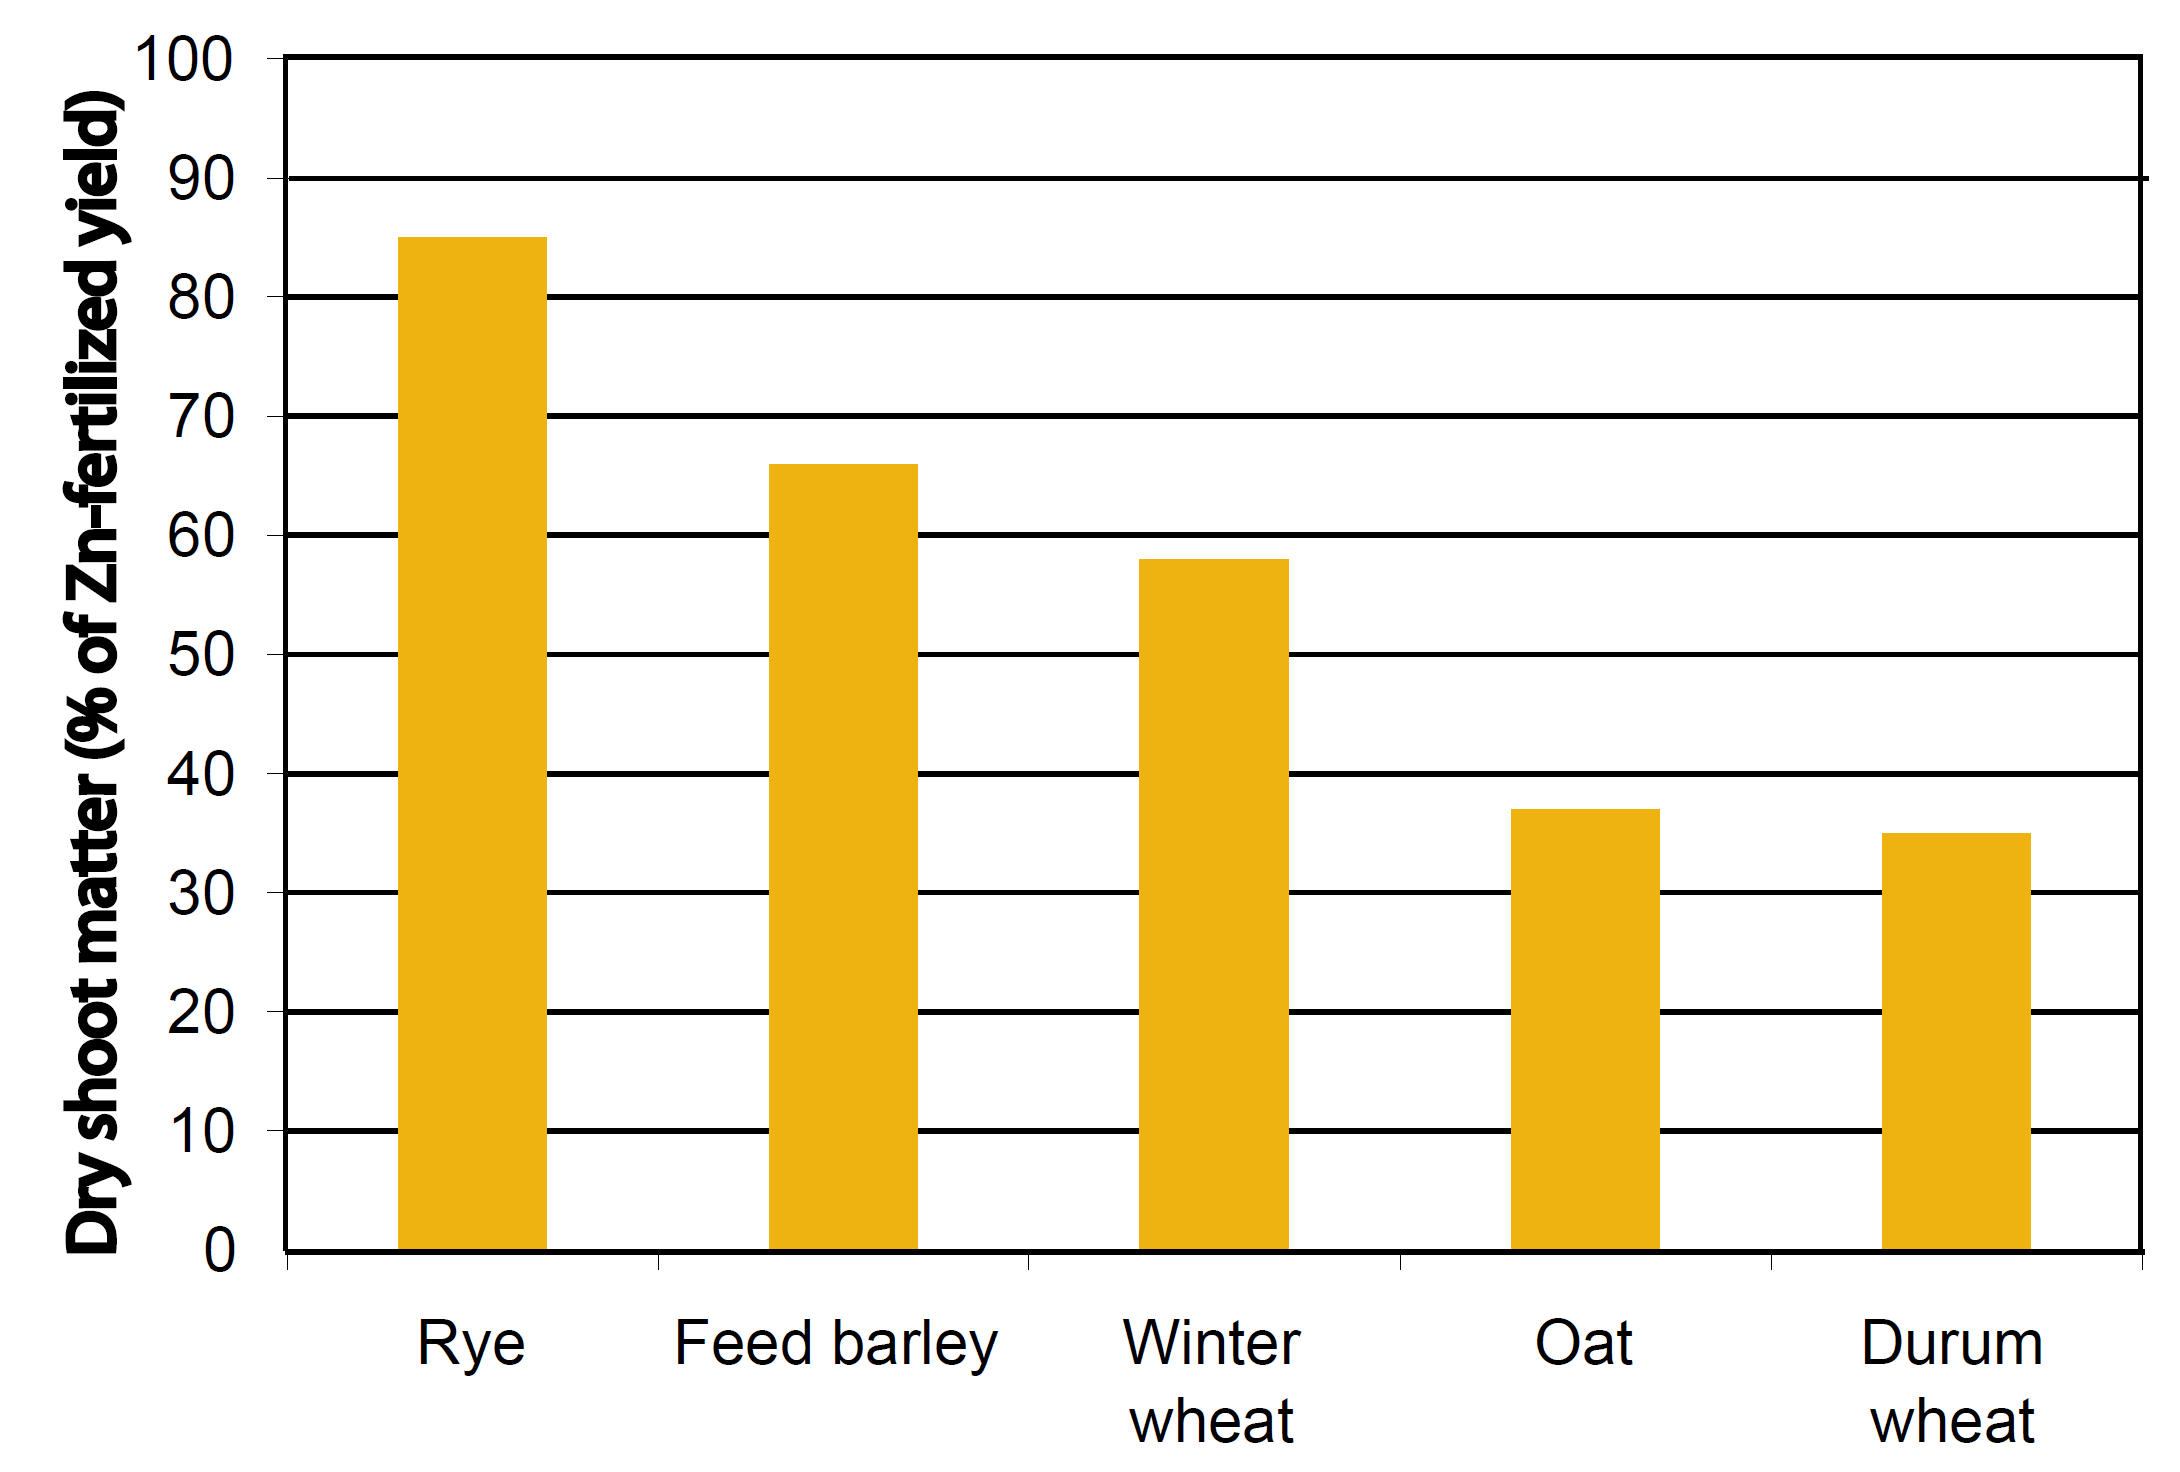 Bar graph demonstrating various crops' sensitivity to low soil zinc levels. Rye is the least effected, followed by feed barley, winter wheat, oat, and durum wheat in that order